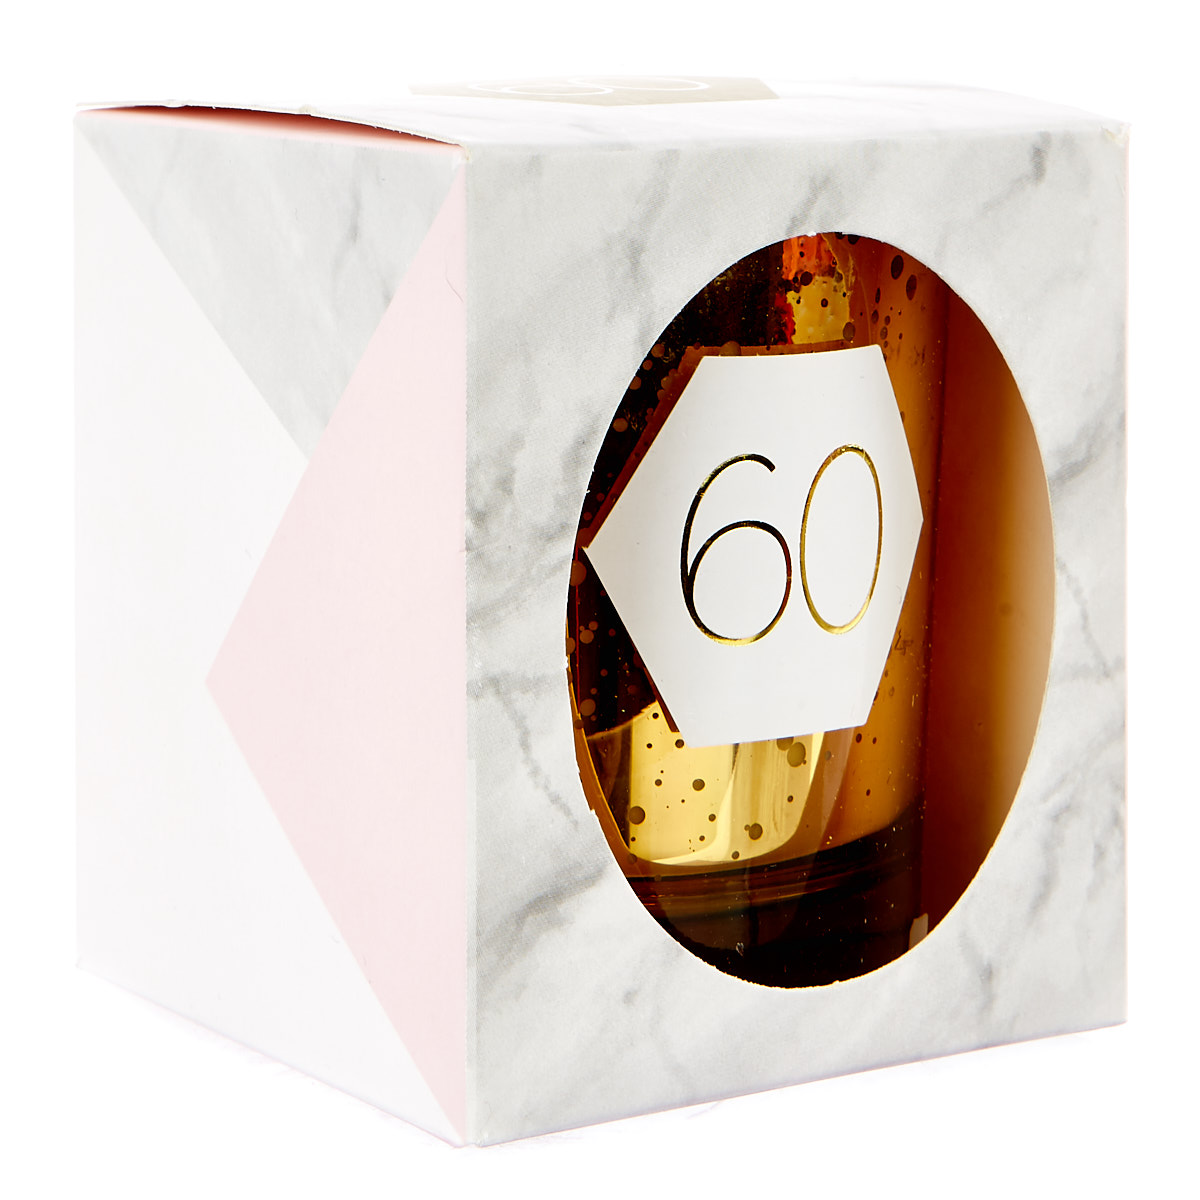 Gold Vanilla Scented 60th Birthday Candle